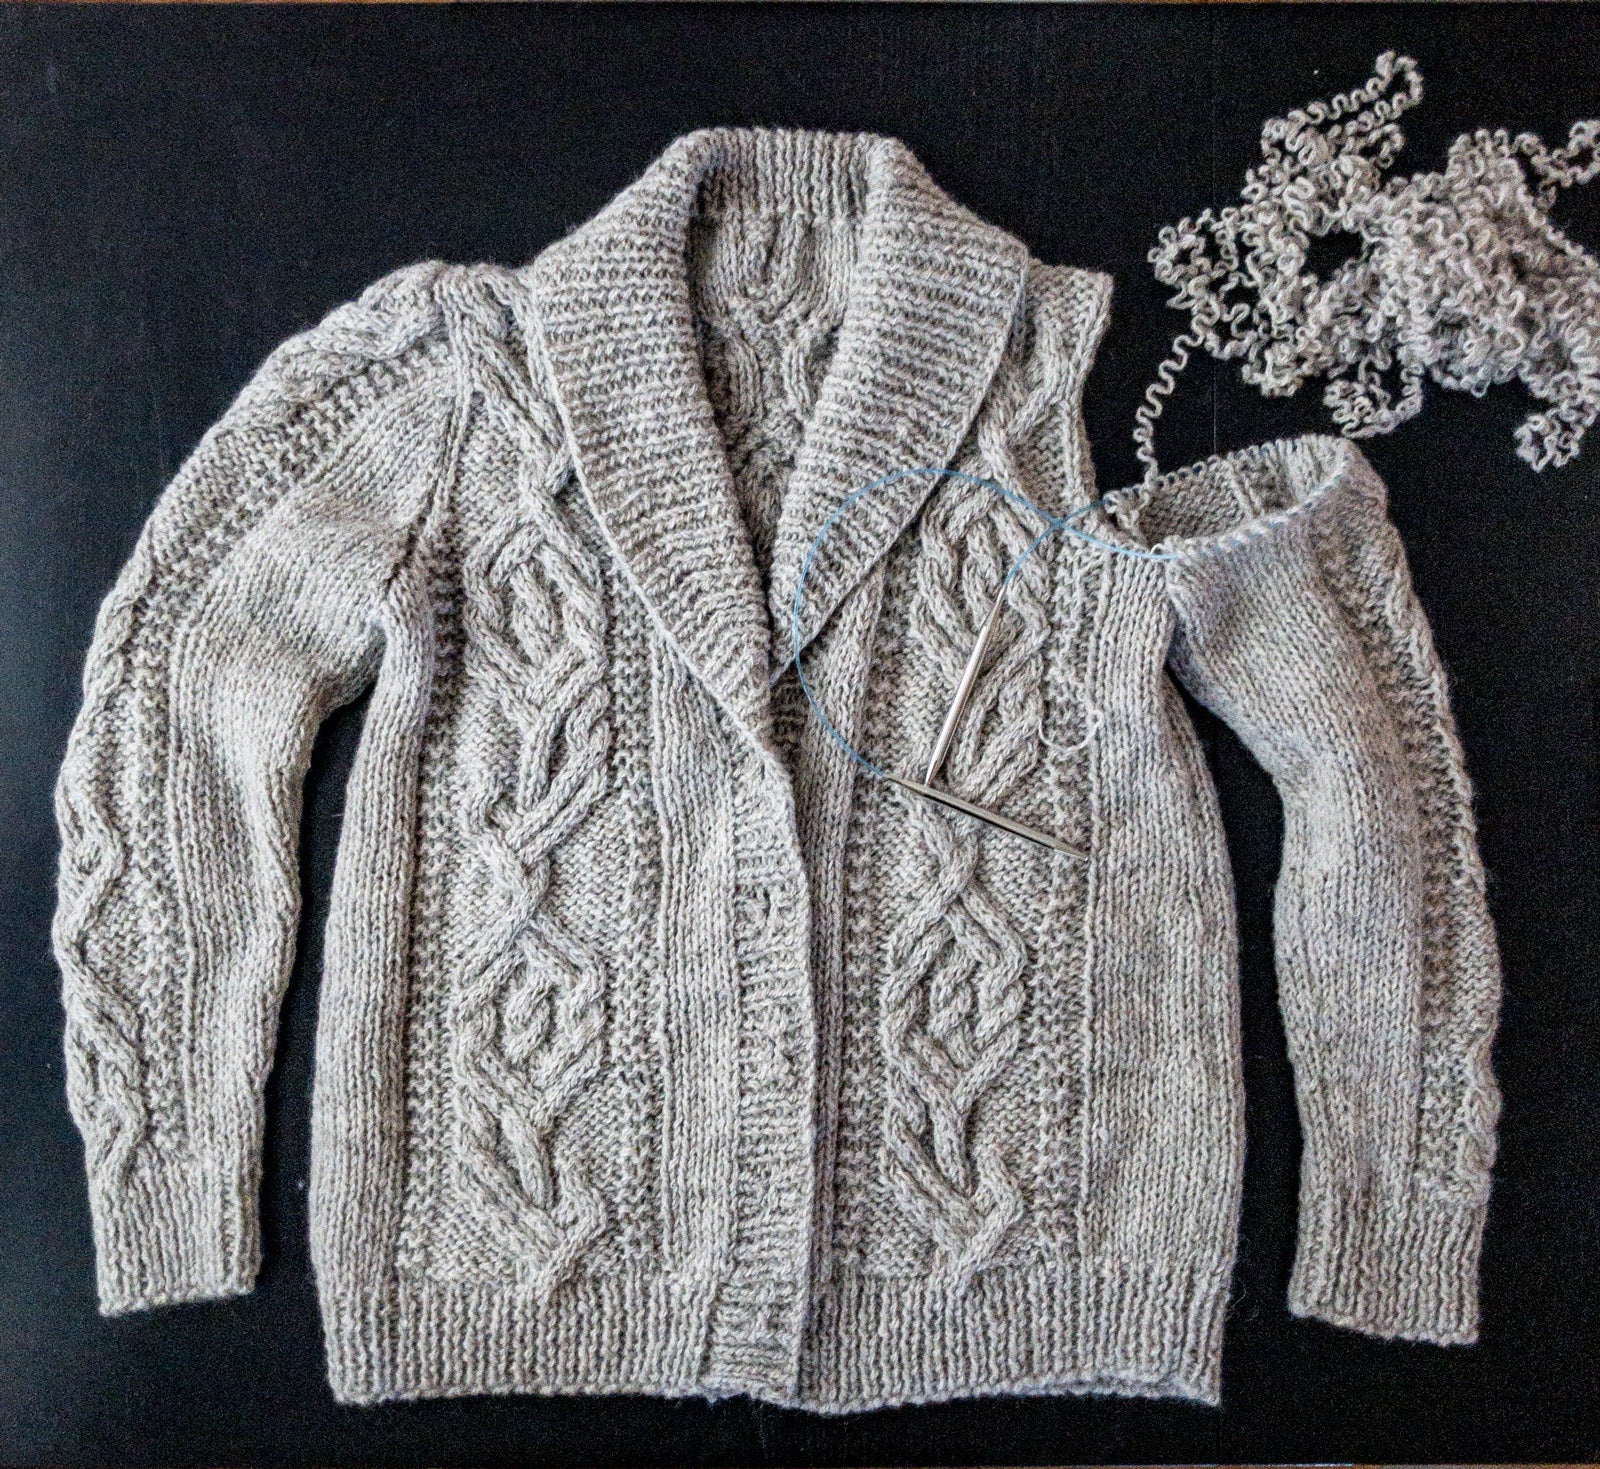 Unraveling the sleeve cap of Jungrass Cabled Cardigan